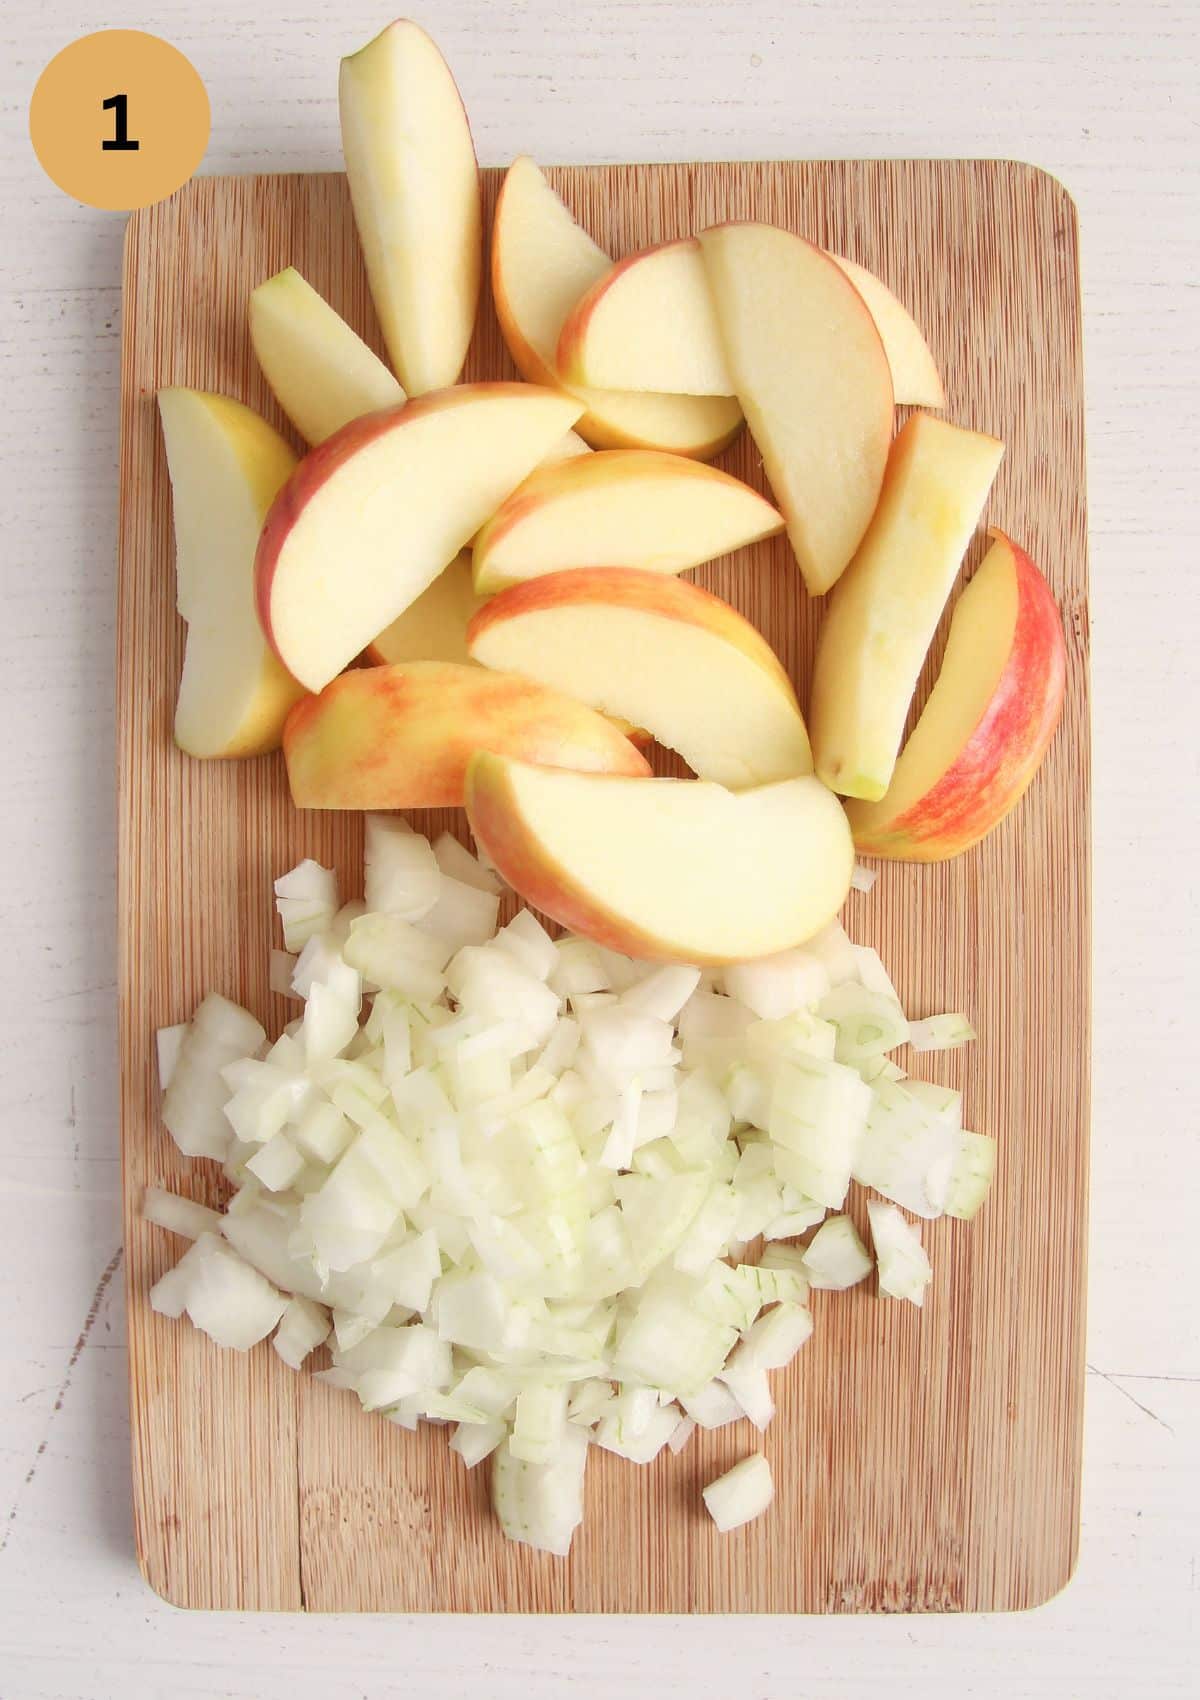 sliced apples and chopped onions on a wooden board.